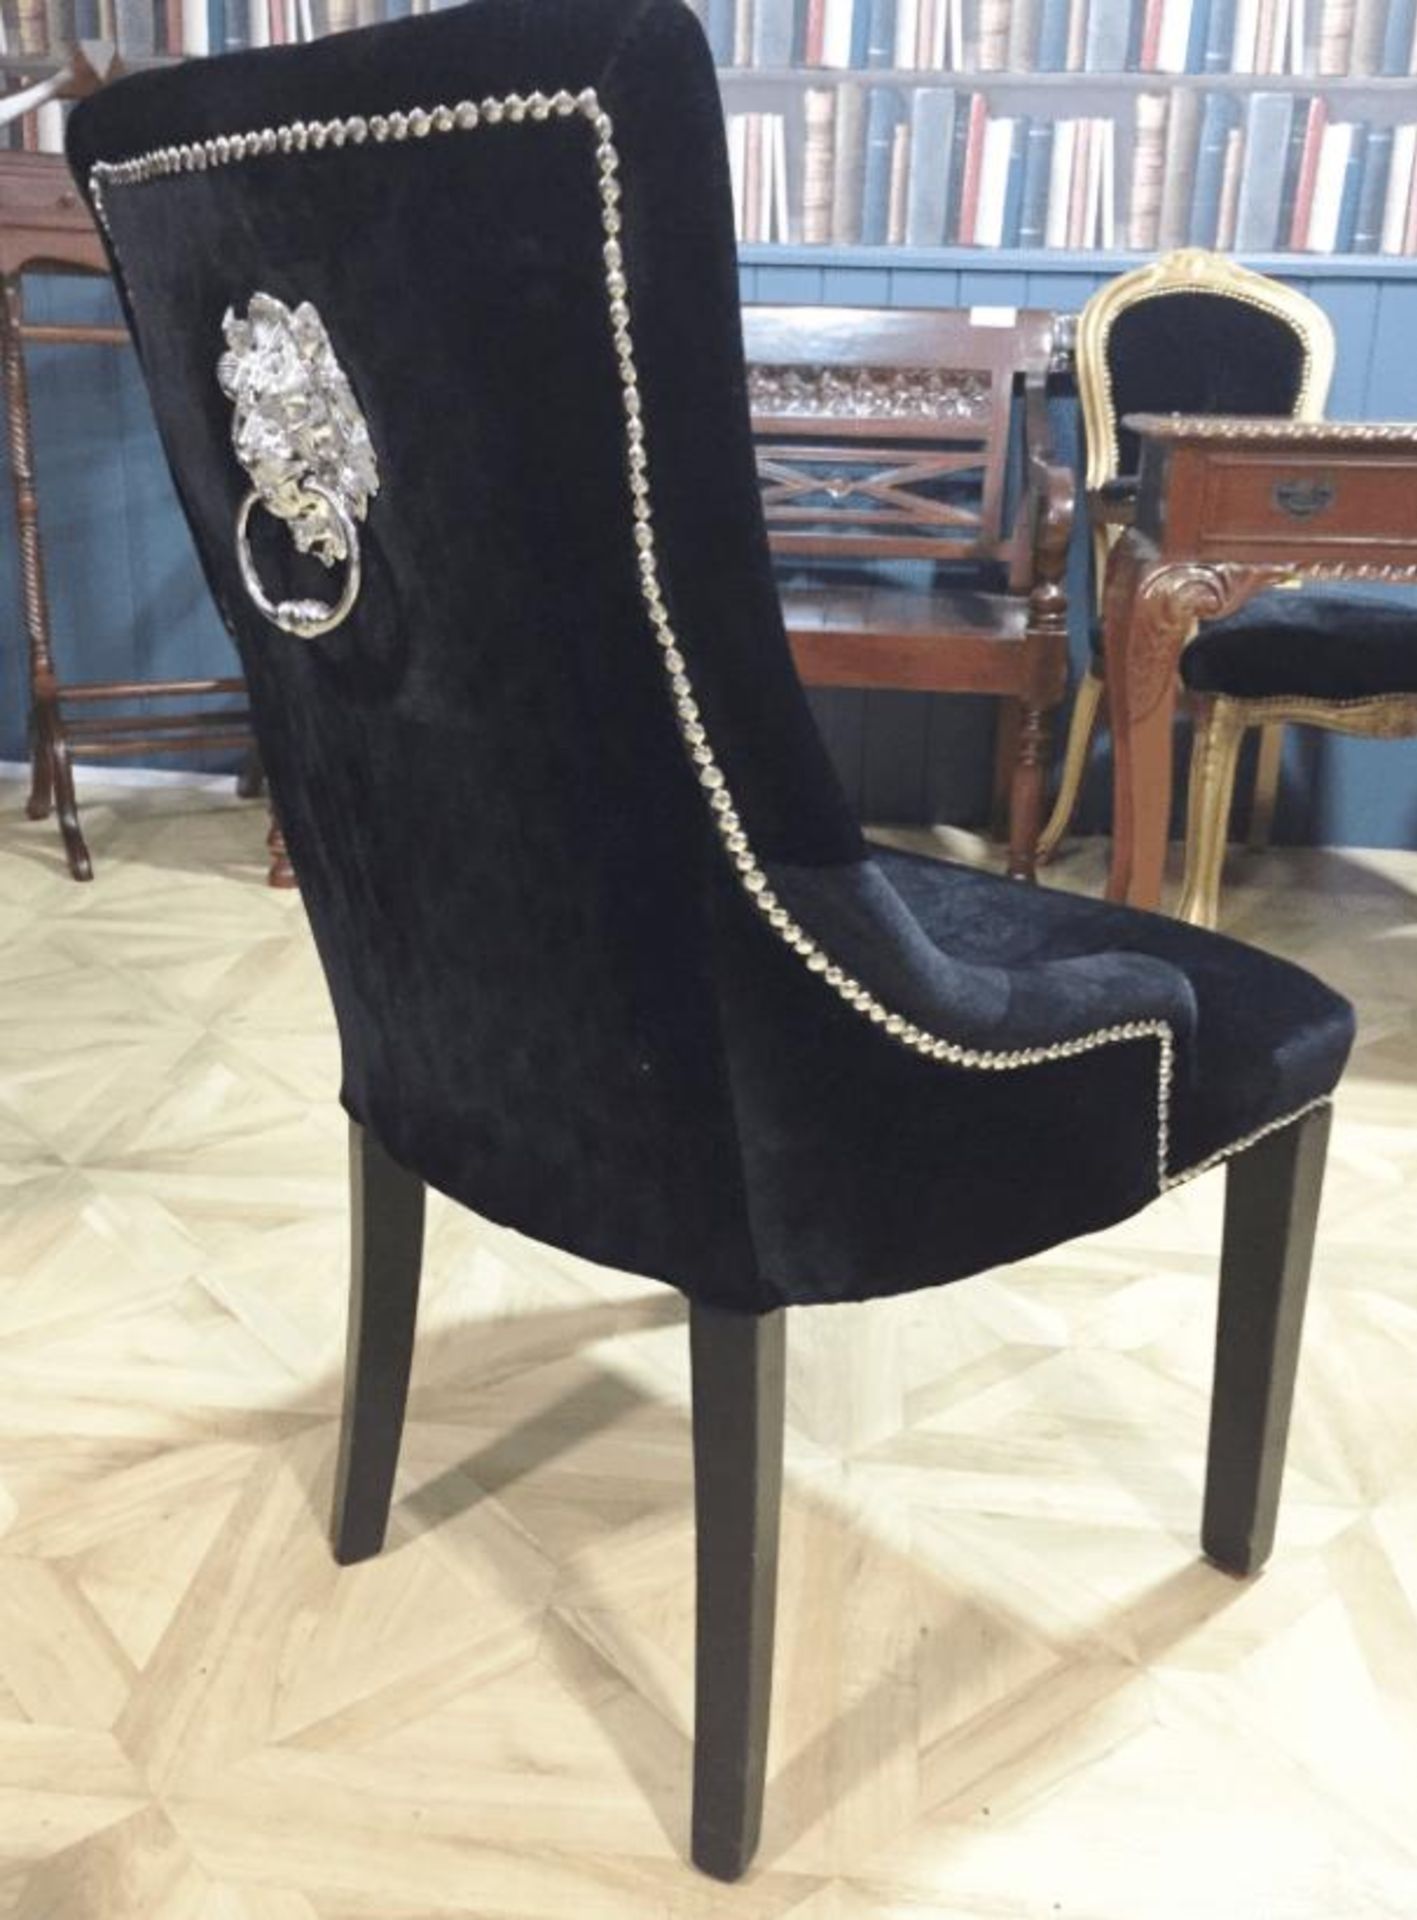 6 x HOUSE OF SPARKLES Luxury Vintage-style Button-Back 'LION' Dining Chairs Richly Upholstered In